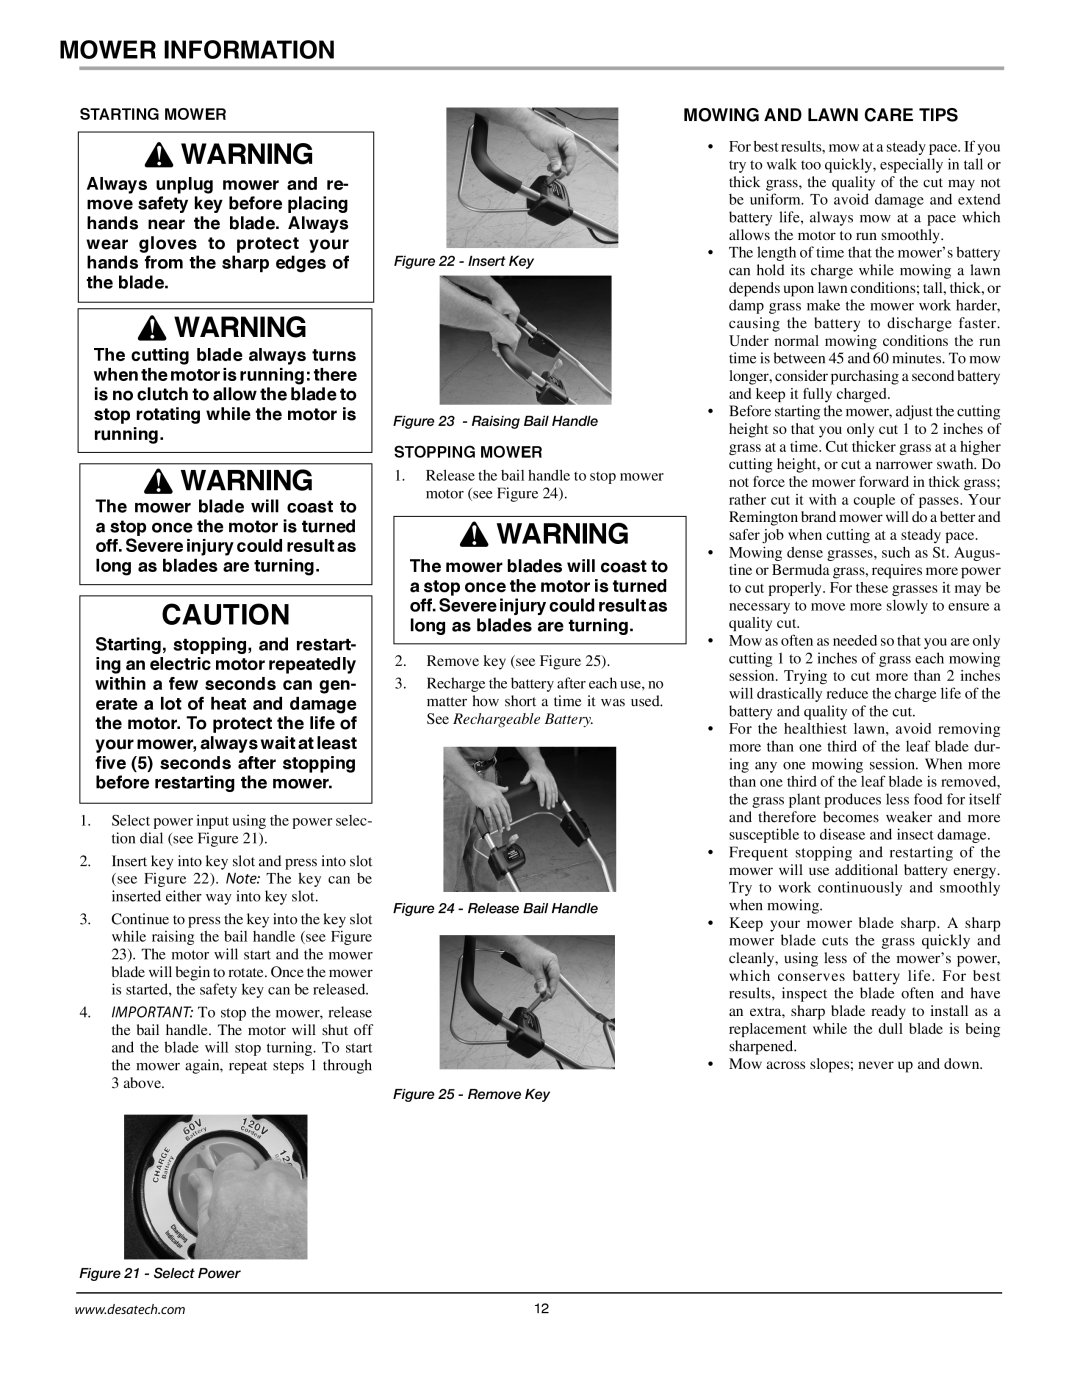 Remington Power Tools MPS6017A manual Mower Information, Mowing And Lawn Care Tips 